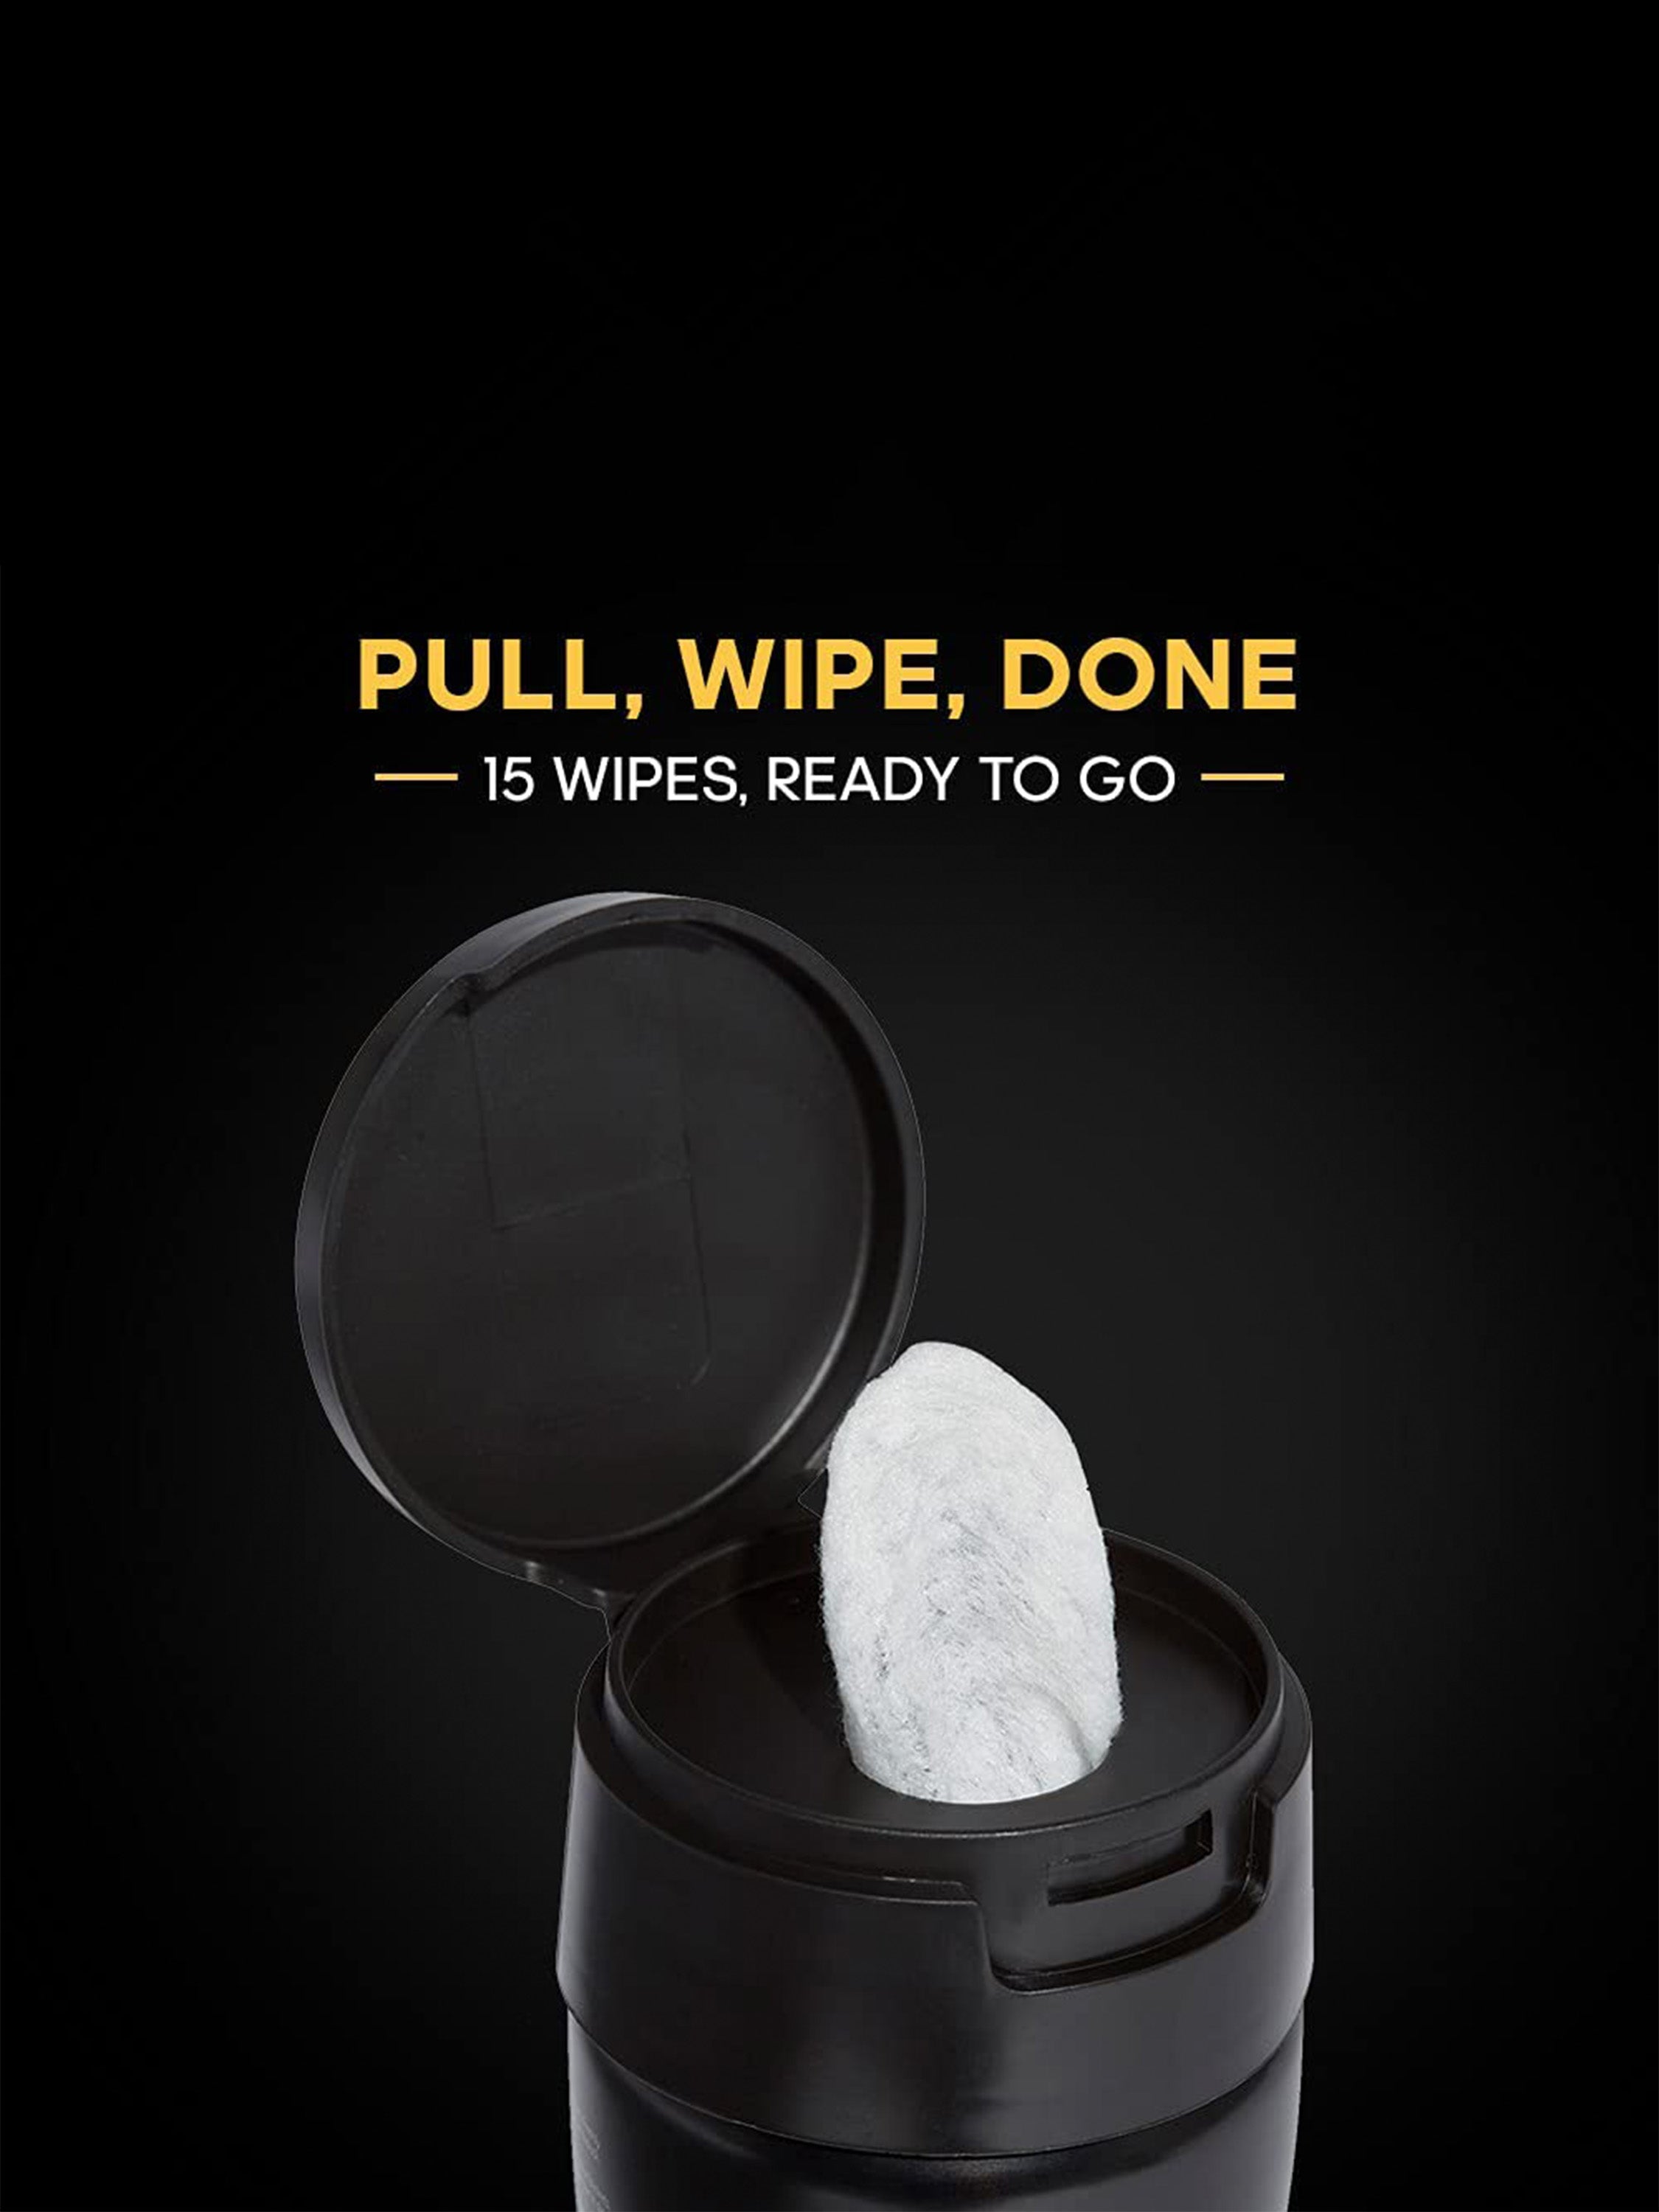 Adidas Sneaker Quick Wipes